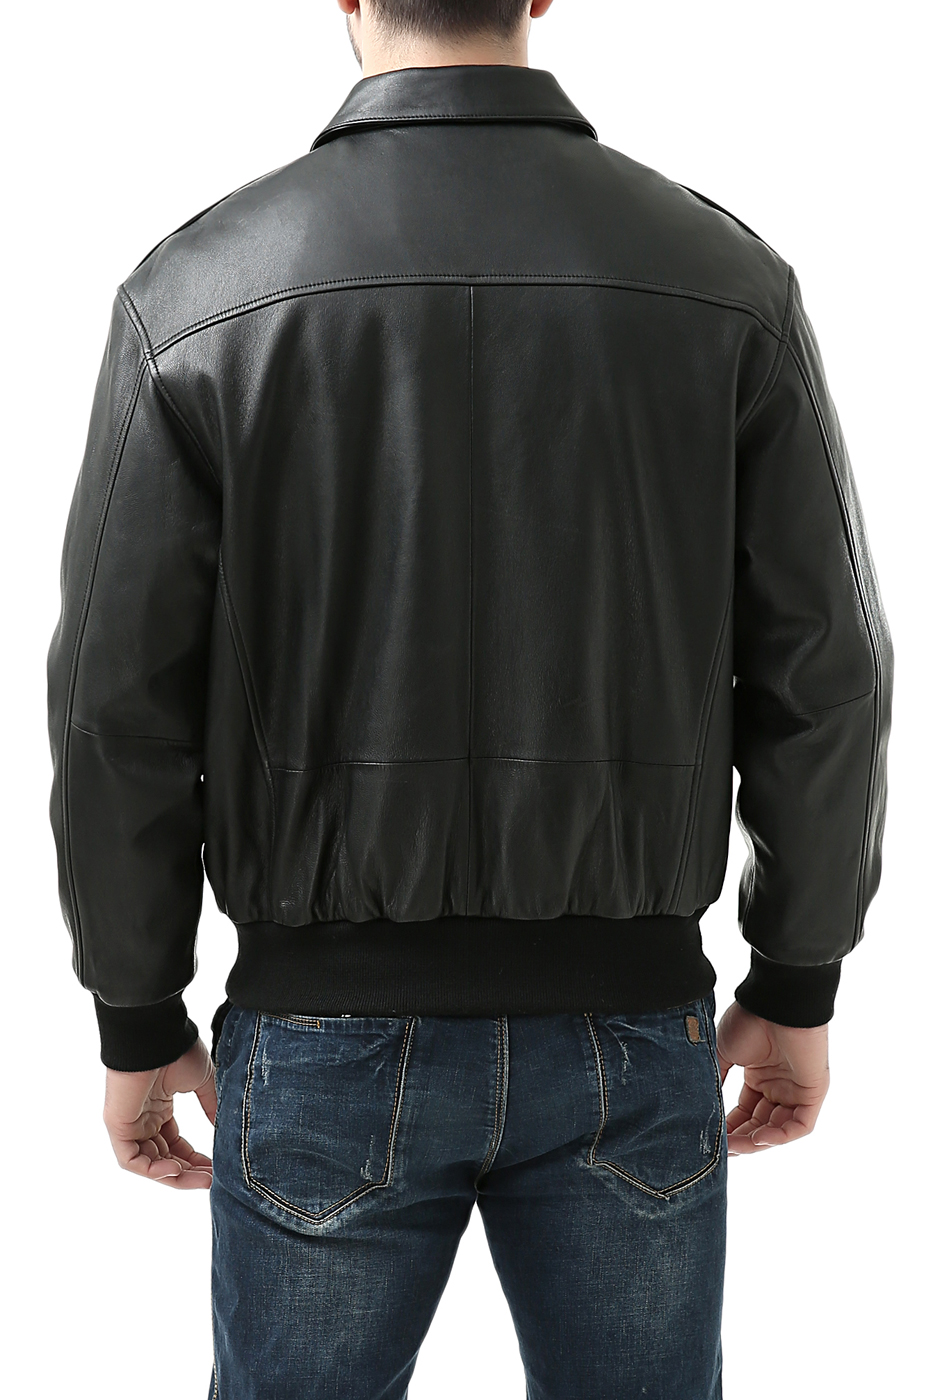 Landing Leathers Mens Air Force A-2 Leather Flight Bomber Jacket (Regular & Tall) - image 3 of 7